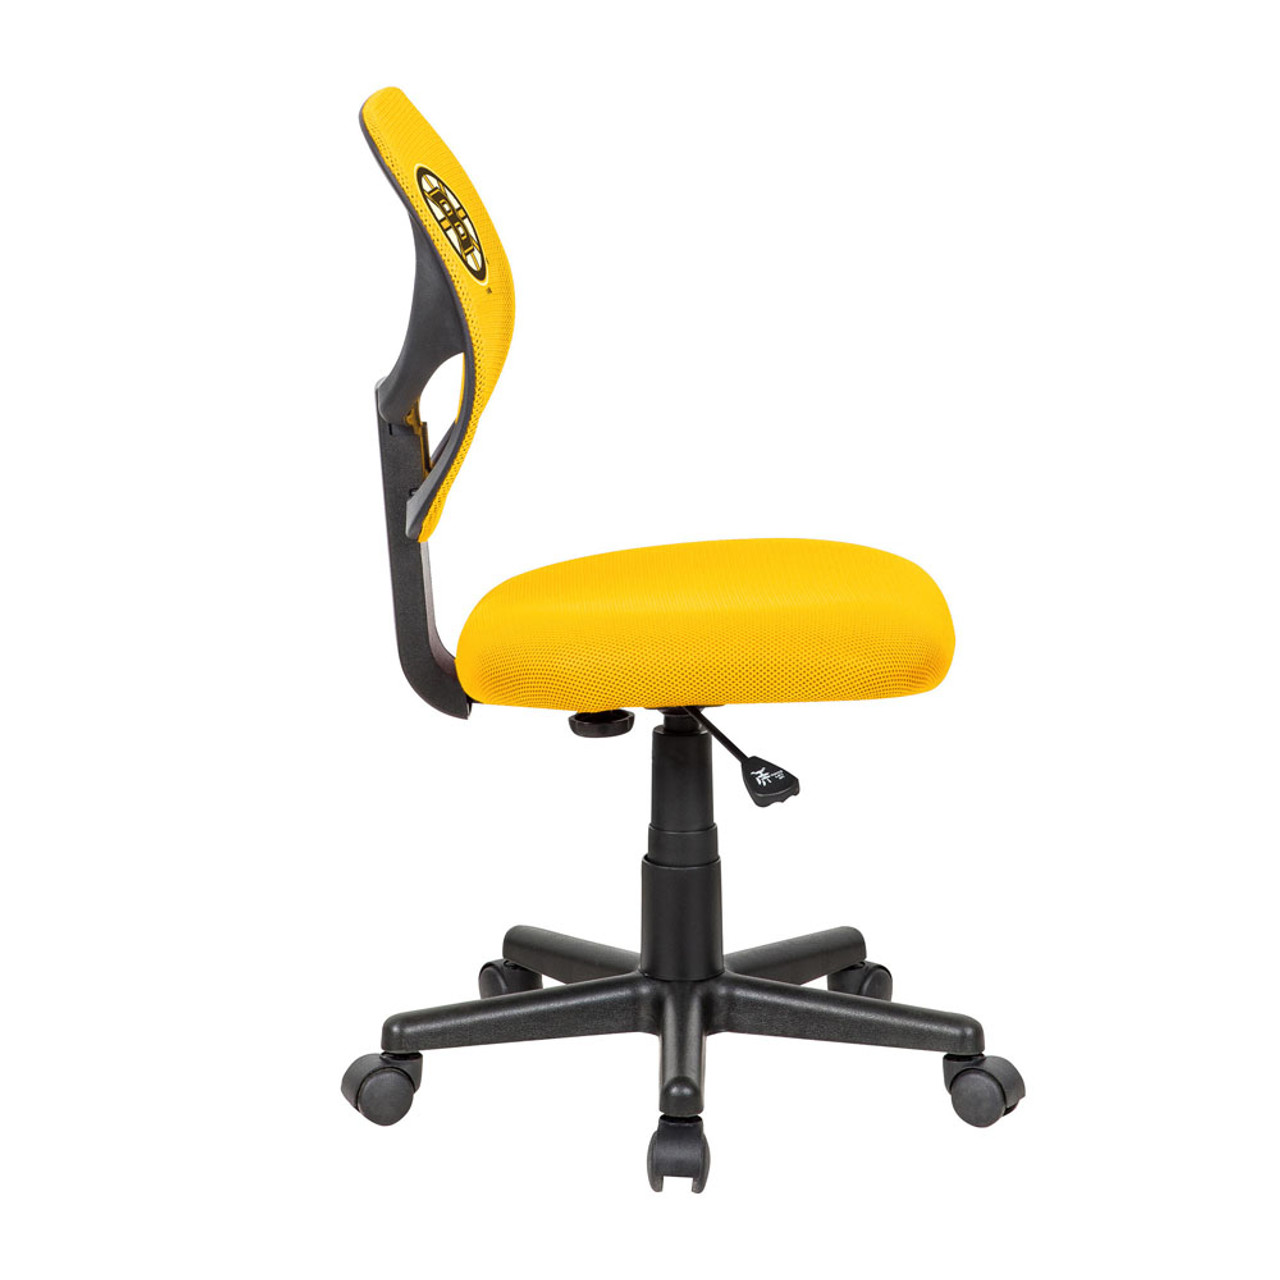 496-4001, Boston, Bos, Bruins, Armless, Desk, Task, Chair, FREE SHIPPING, NFL, Imperial